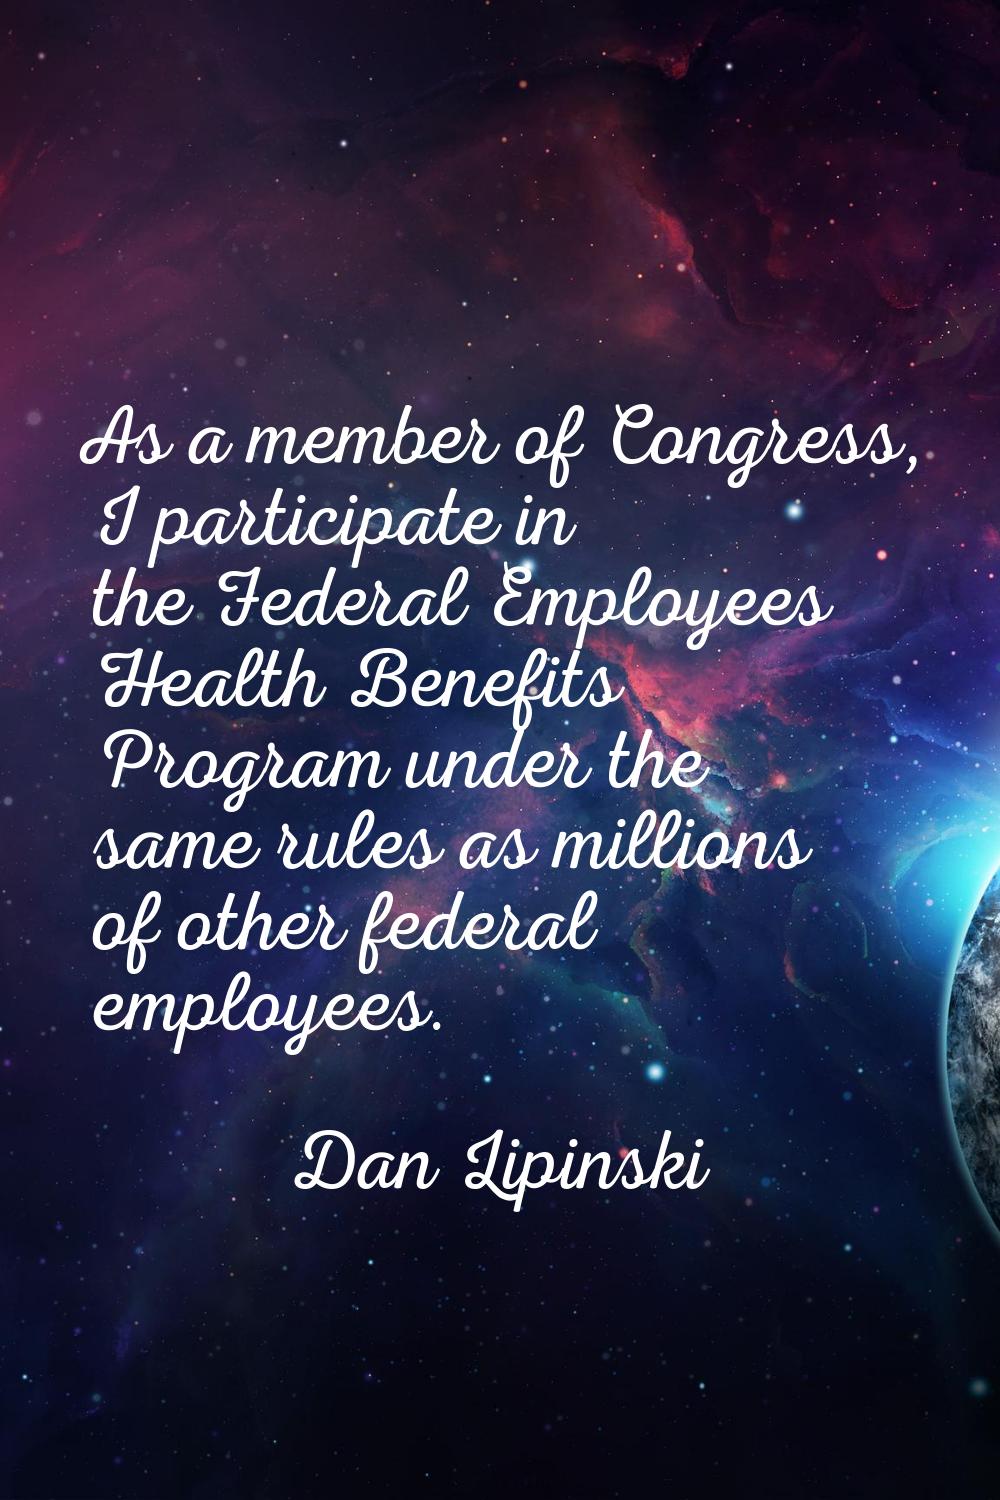 As a member of Congress, I participate in the Federal Employees Health Benefits Program under the s